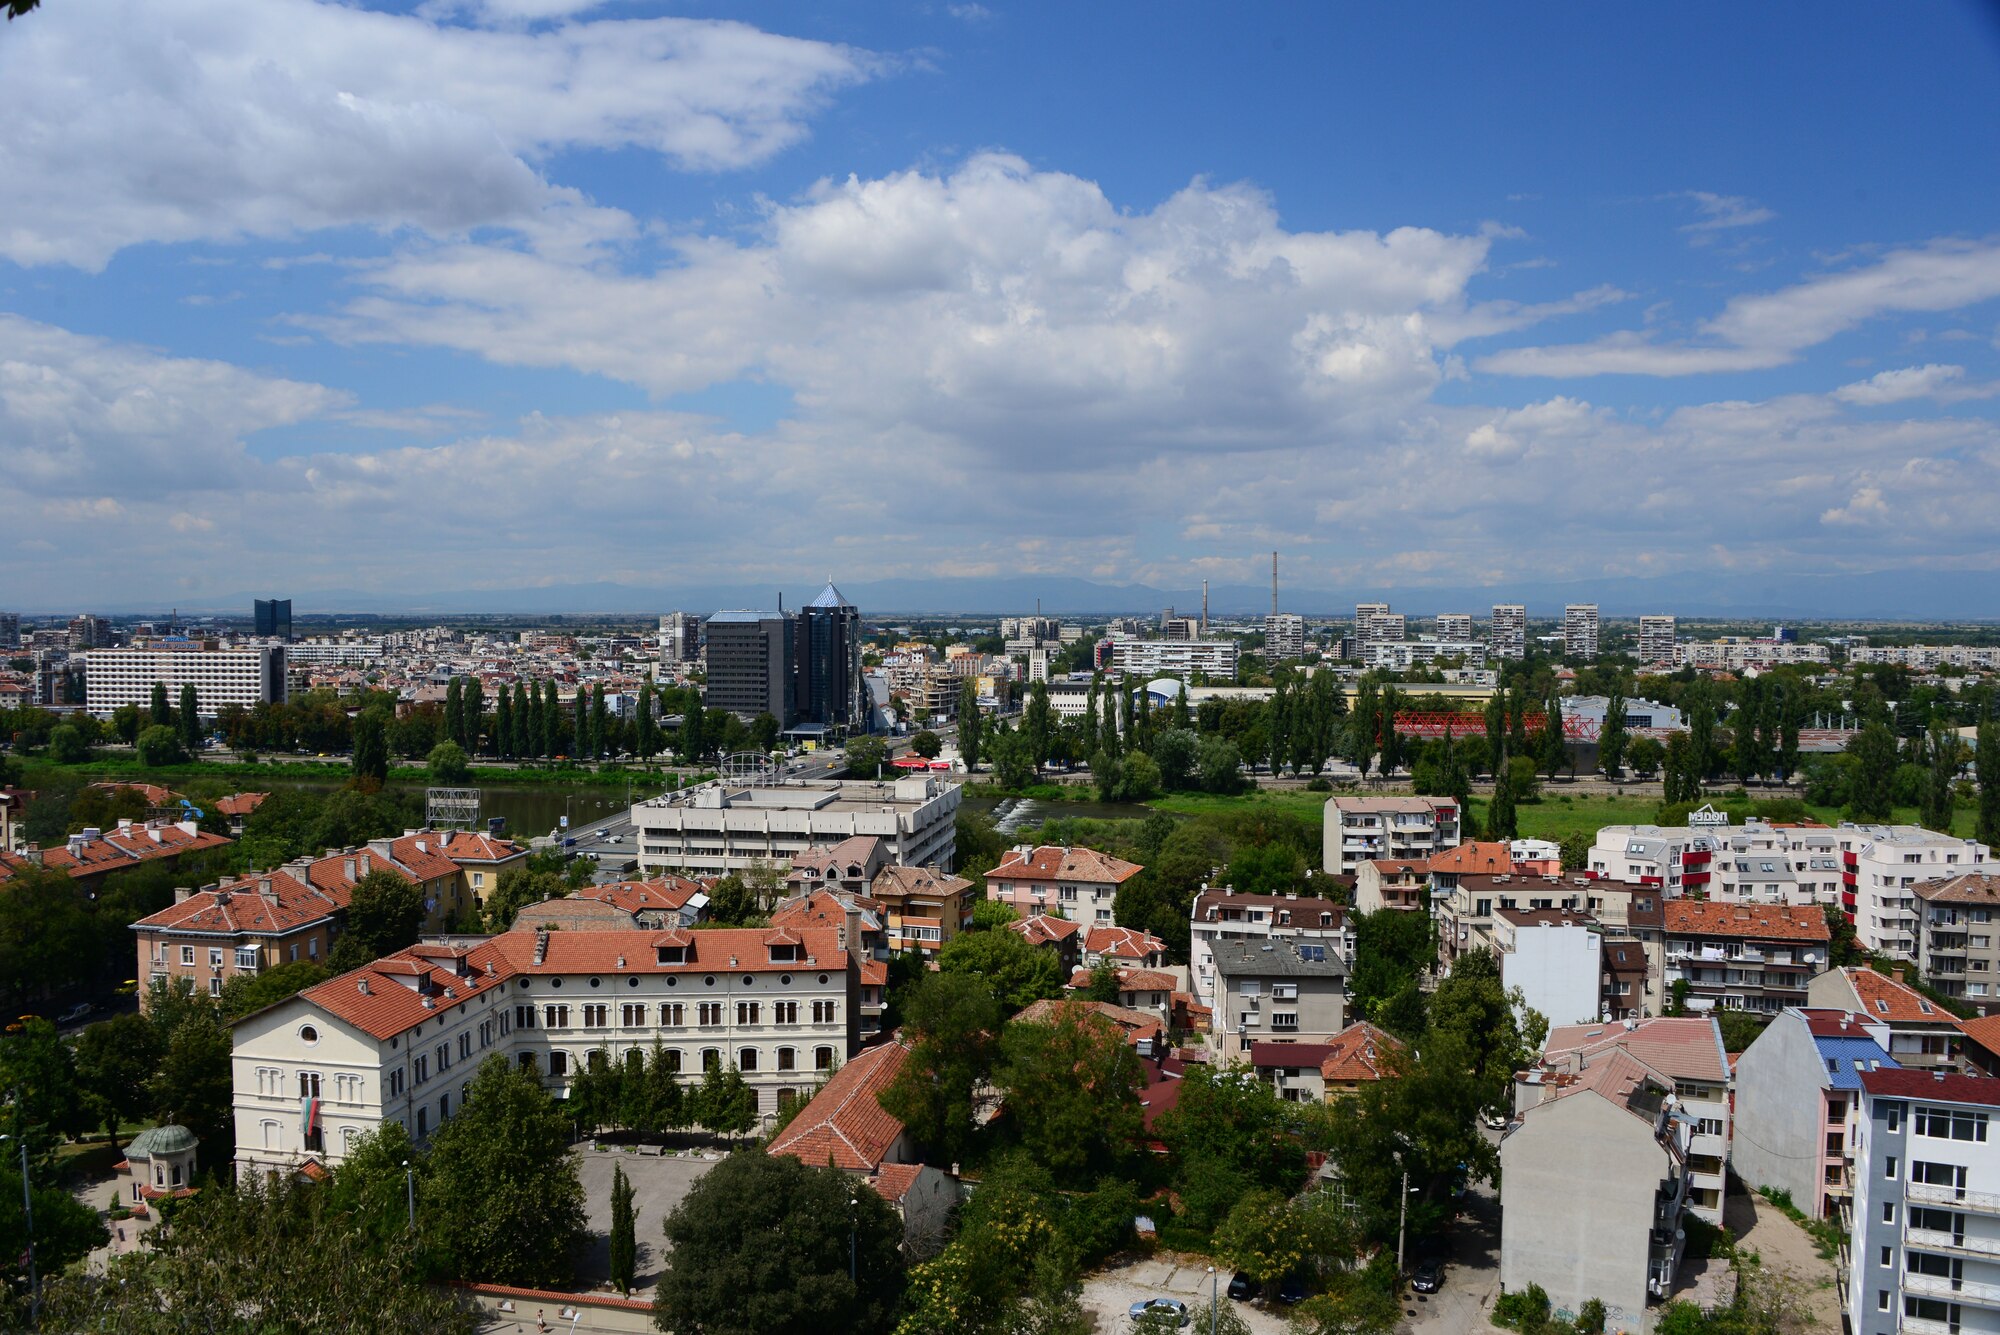 A view of Plovdiv, Bulgaria from atop a nearby hill.  Tennessee National Guard Soldiers and Airmen enjoyed a Morale Wellness and Recreation visit to Plovdiv on Aug.13, 2016 while they were deployed to Novo Selo Training Area, Bulgaria to participate in Humanitarian Civic Assistance projects.    (U.S. Air National Guard photo by Master Sgt. Kendra M. Owenby, 134 ARW Public Affairs)